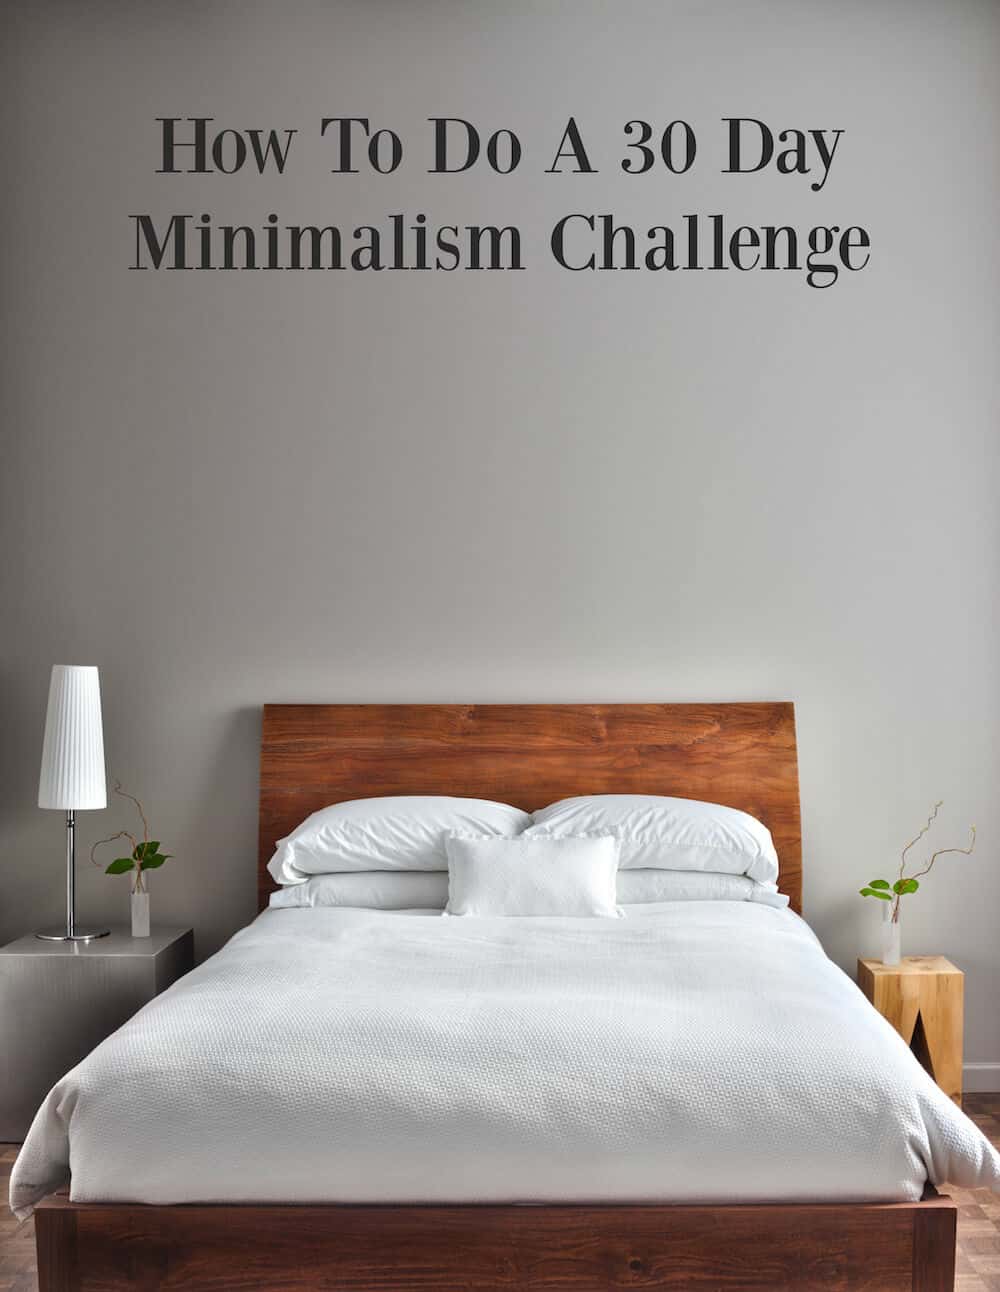 Are you interested in minimalist living? Try it for 30-days. You don't have to get rid of all of your possessions to participate, and it helps with clutter!